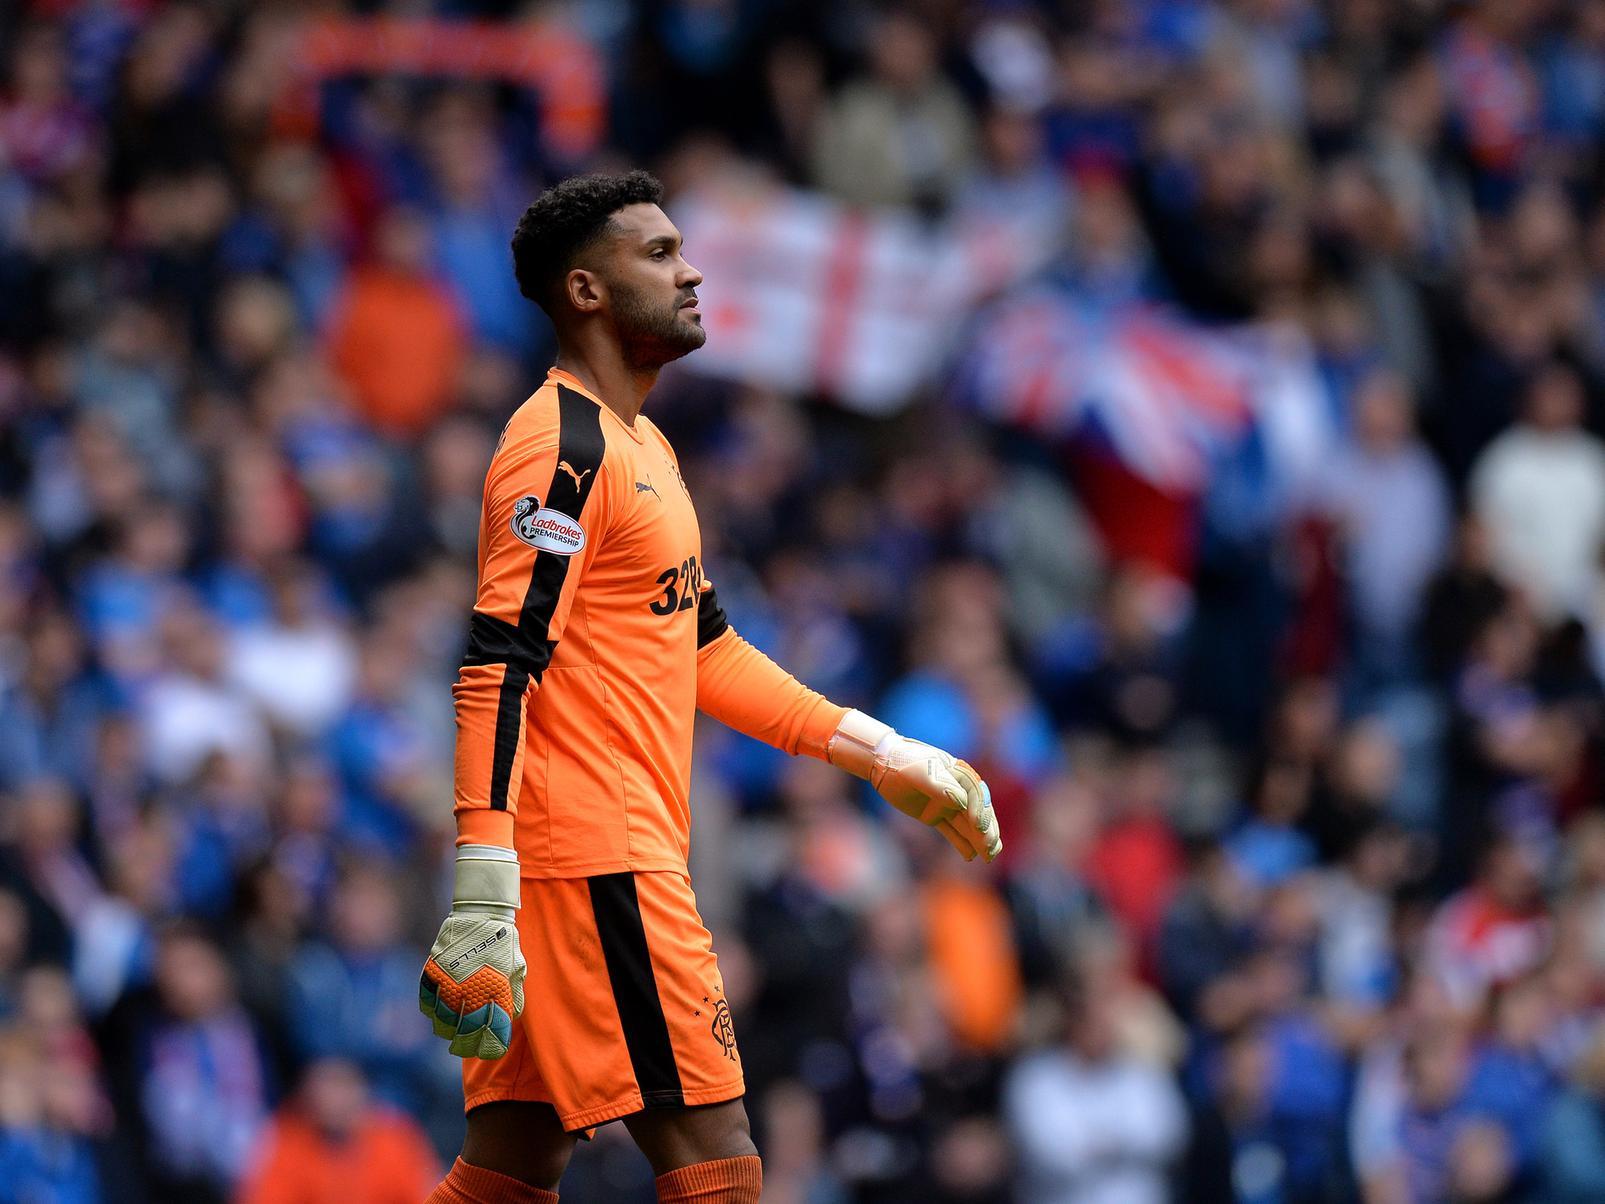 Both Birmingham City and Middlesbrough have been credited with an interest in Rangers' backup goalkeeper Wes Foderingham, whose contract will expire at the end of the season. (Daily Mail)